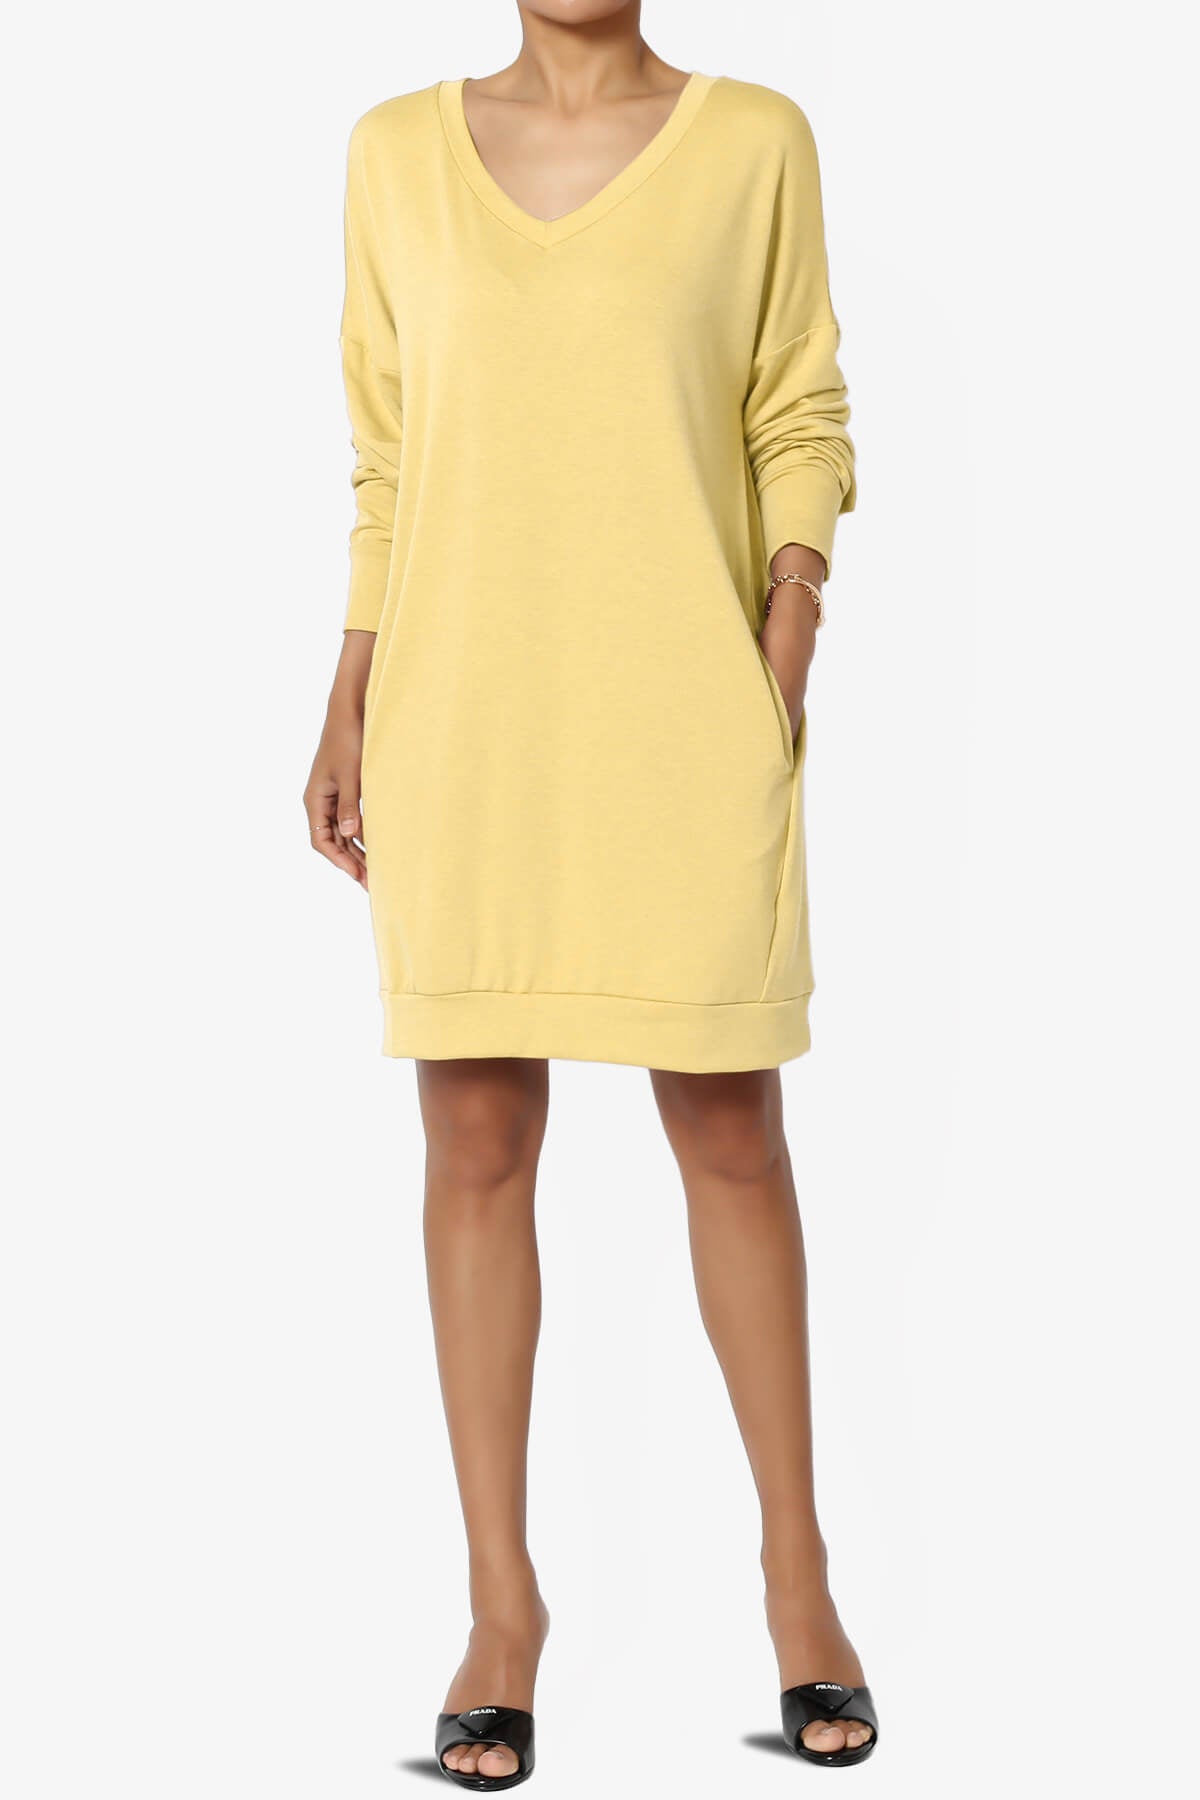 Load image into Gallery viewer, Chrissy V-Neck Pocket Soft Terry Tunic DUSTY BANANA_6
